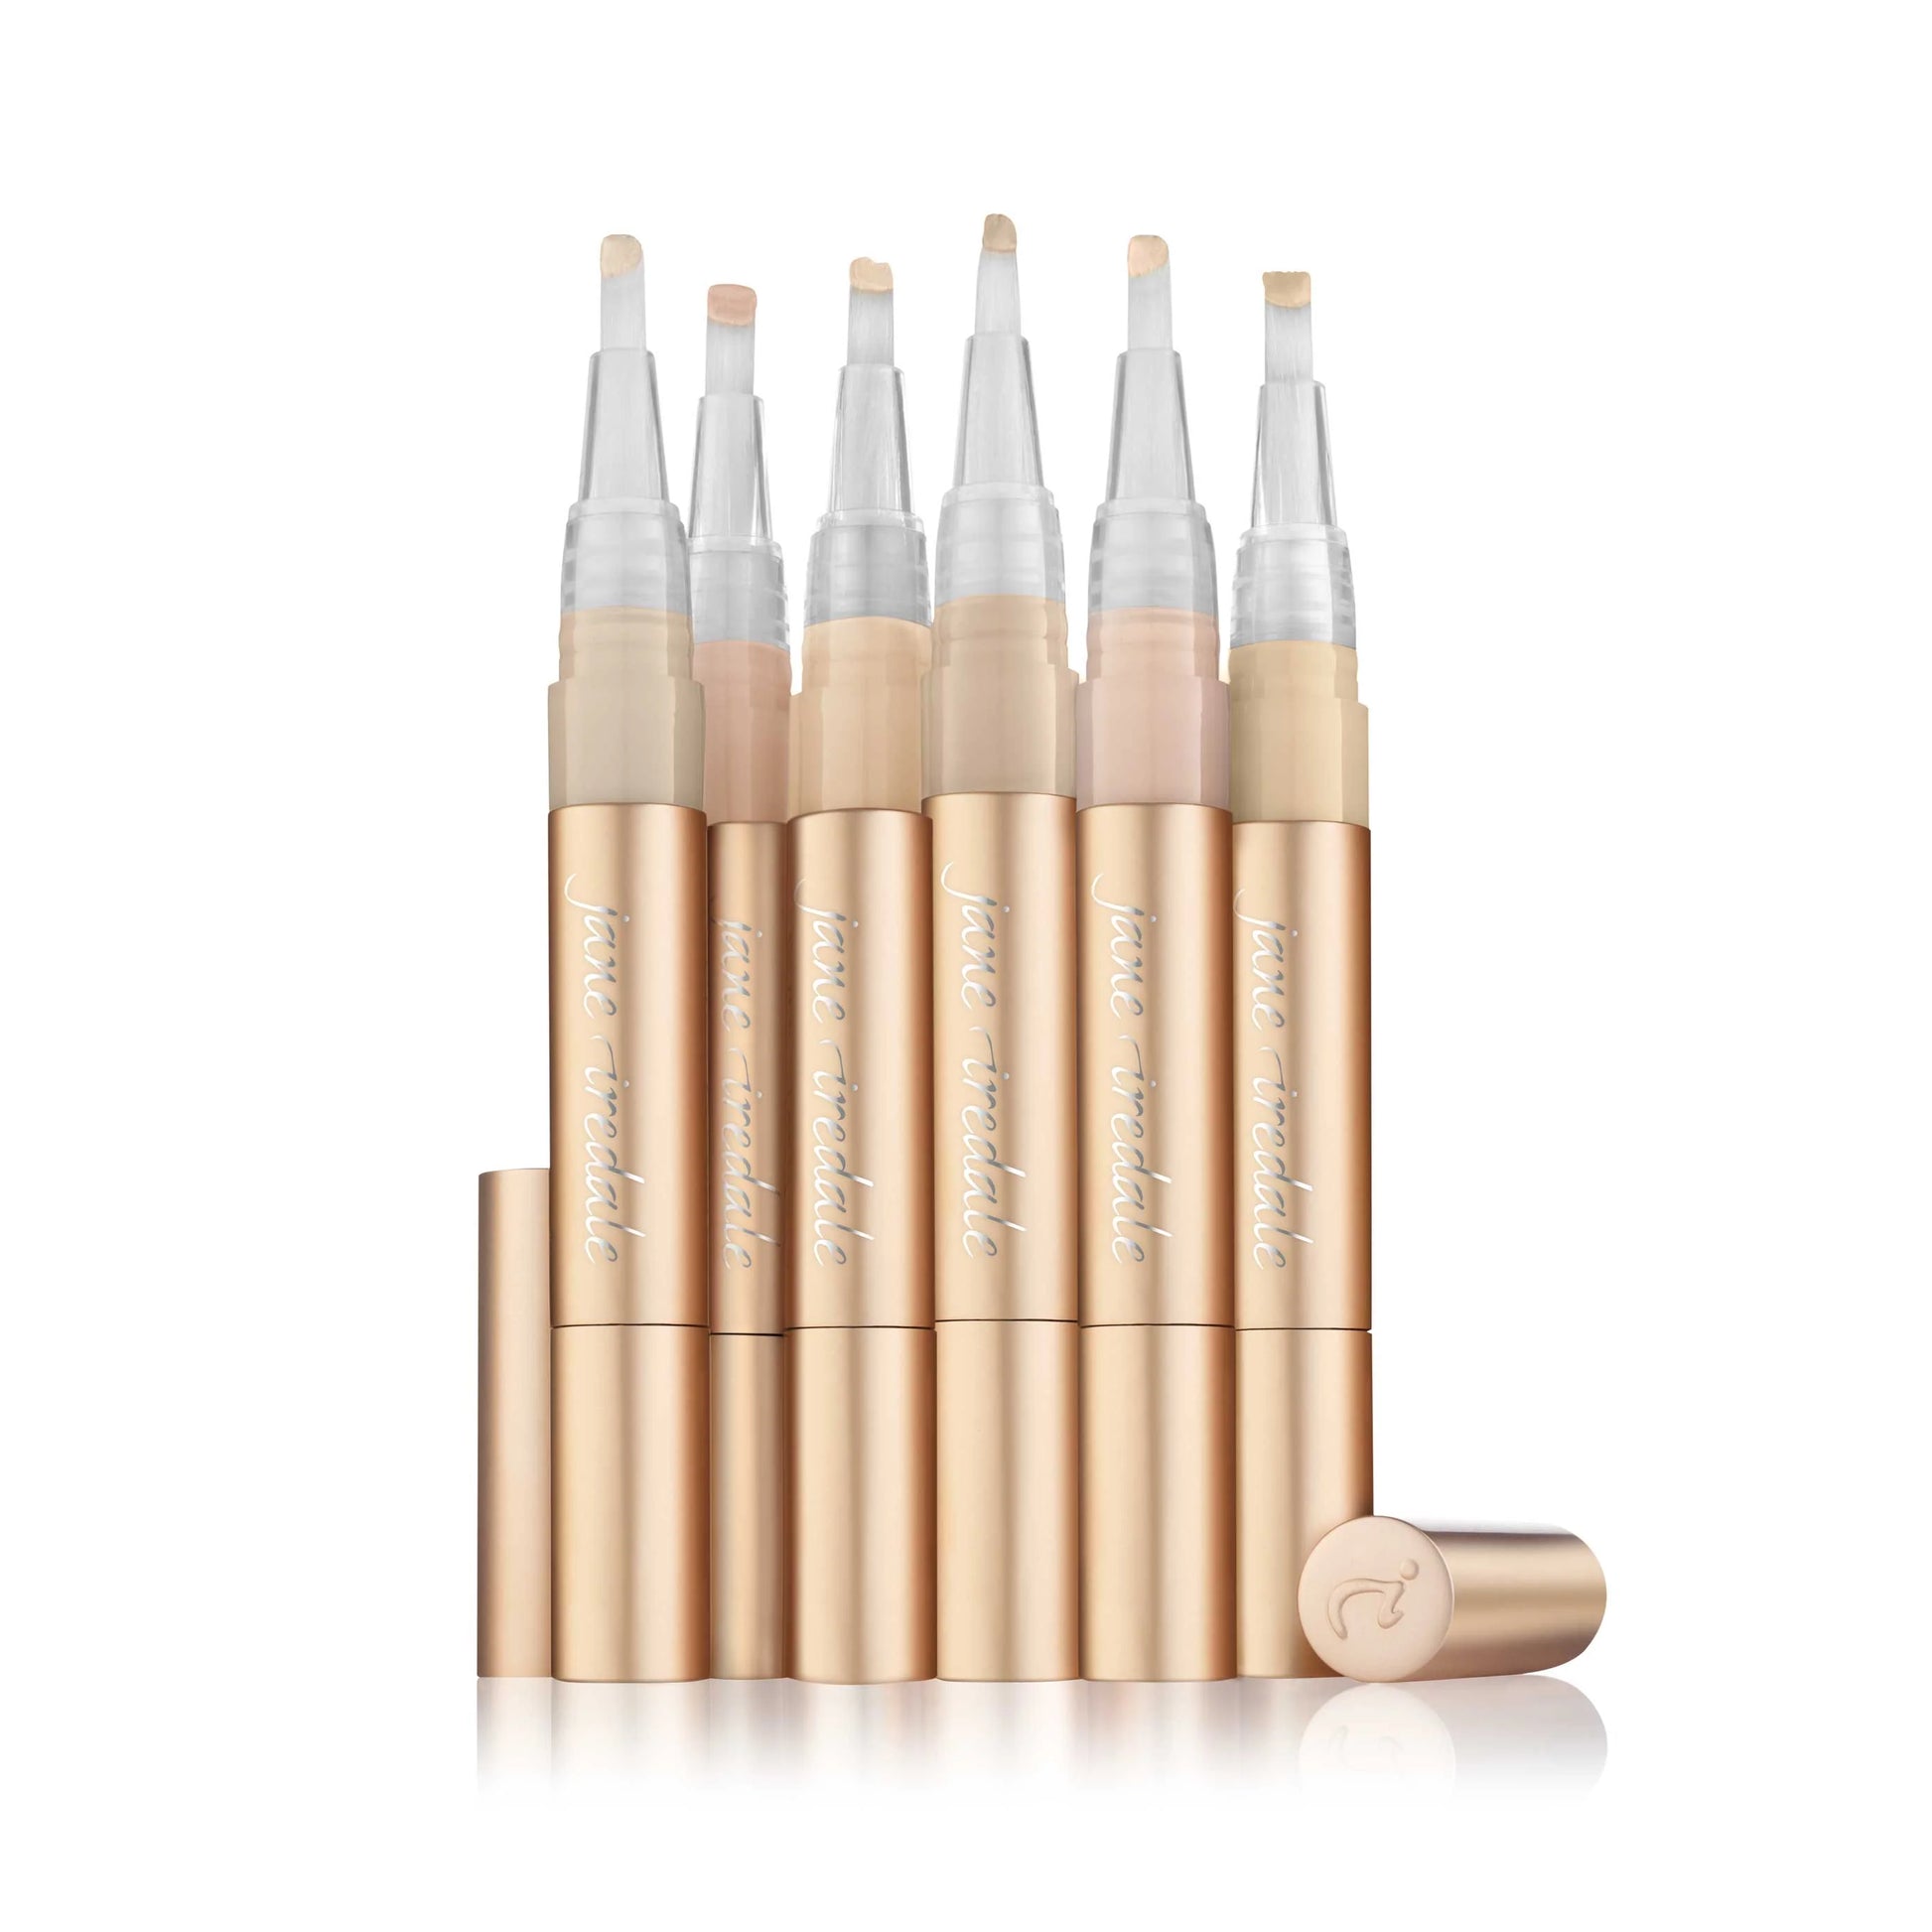 Jane Iredale concealer swatch active light product image